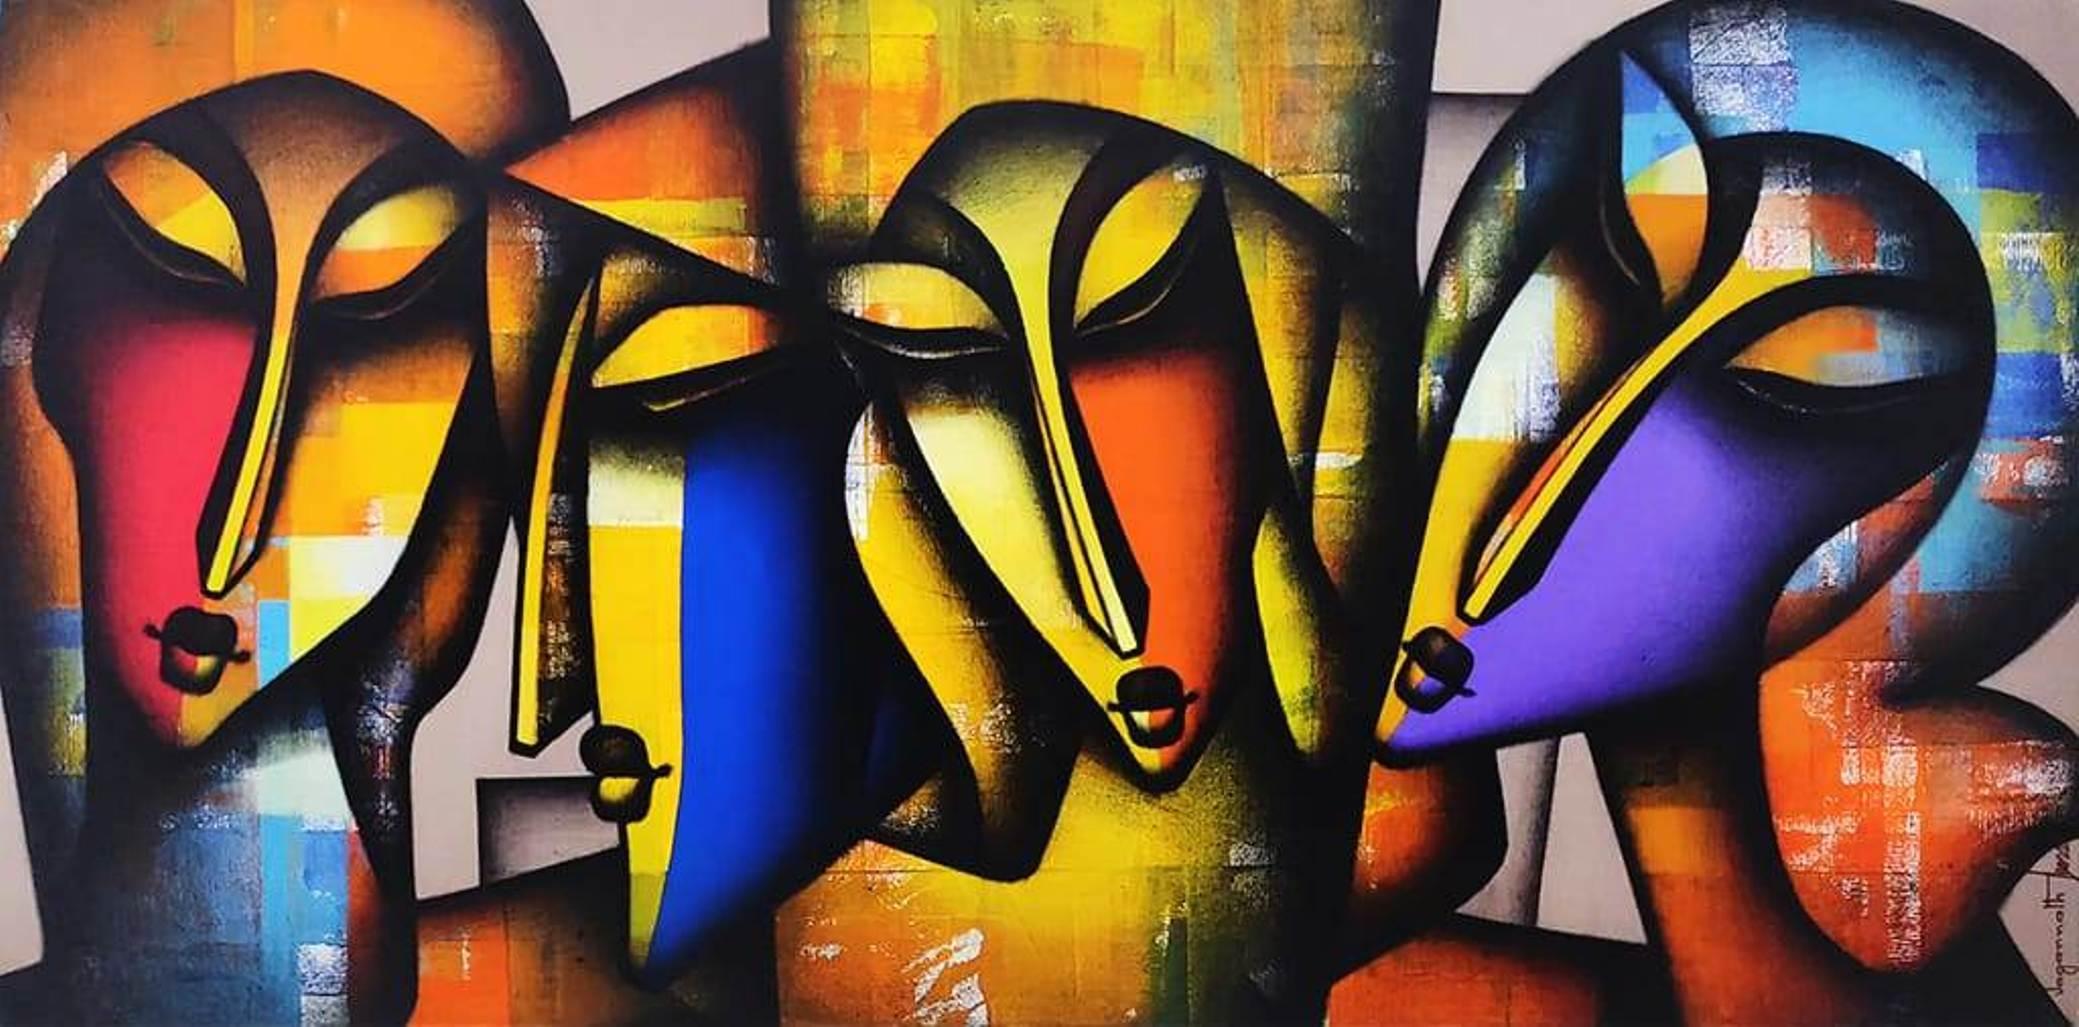 Jagannath Paul Figurative Painting - Togetherness, Charcoal, Acrylic on Canvas Blue, Yellow, Green colors "In Stock"